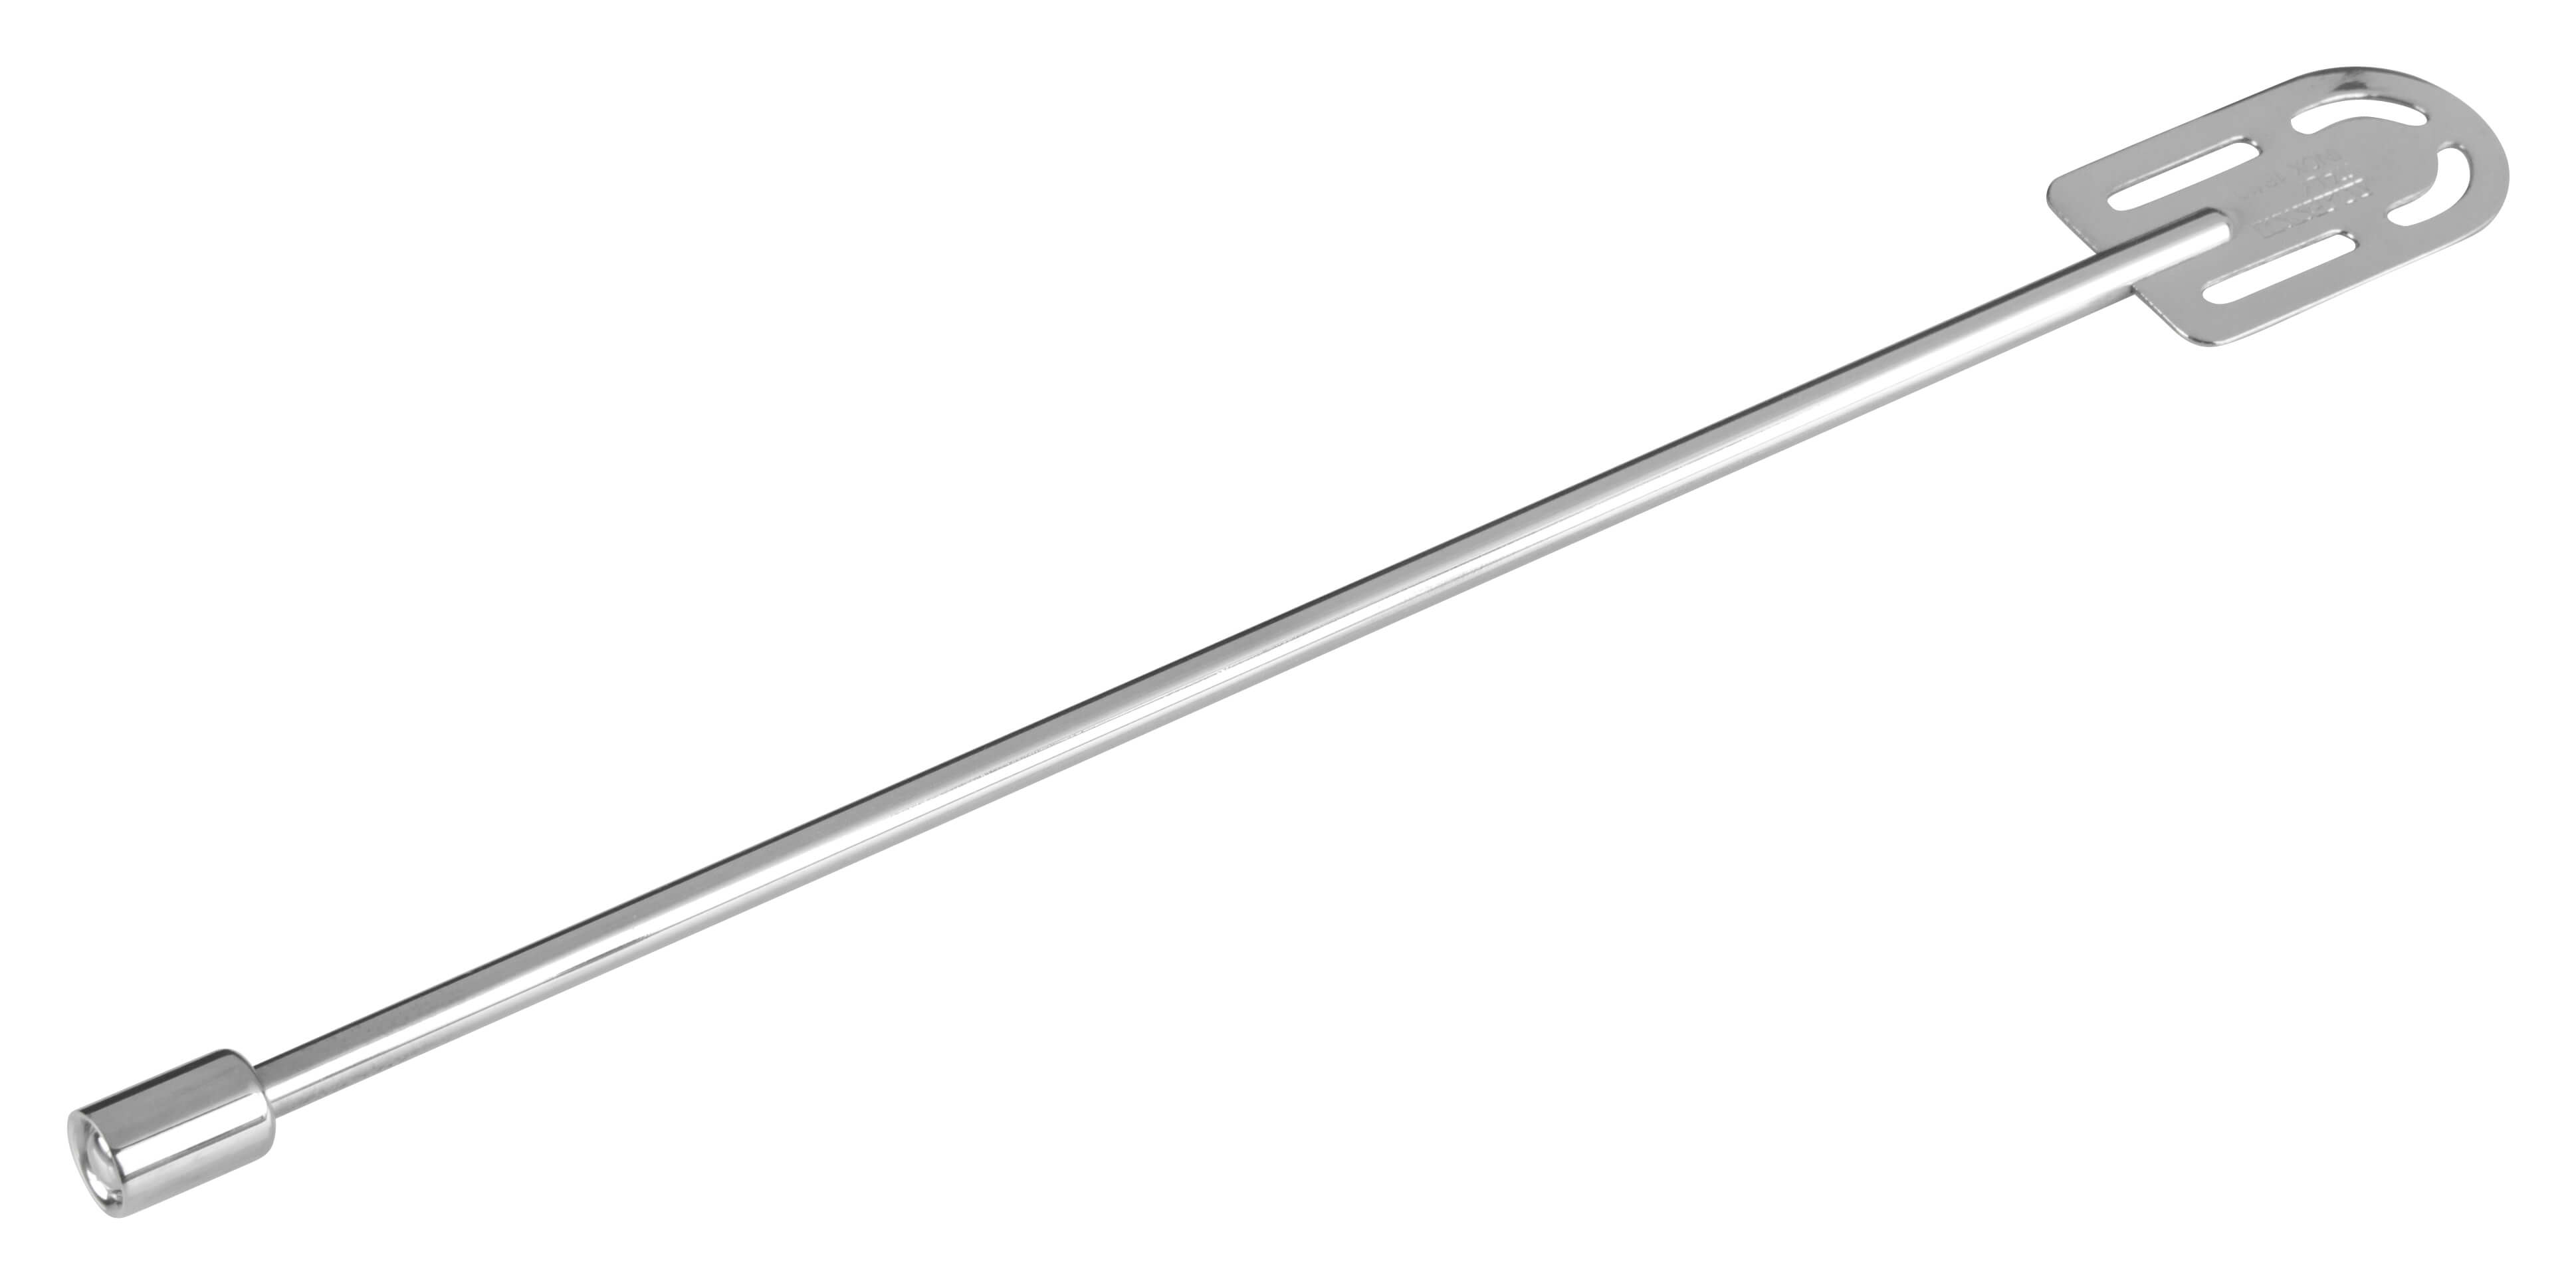 Bar spoon 5054, Alessi, stainless steel - 26cm